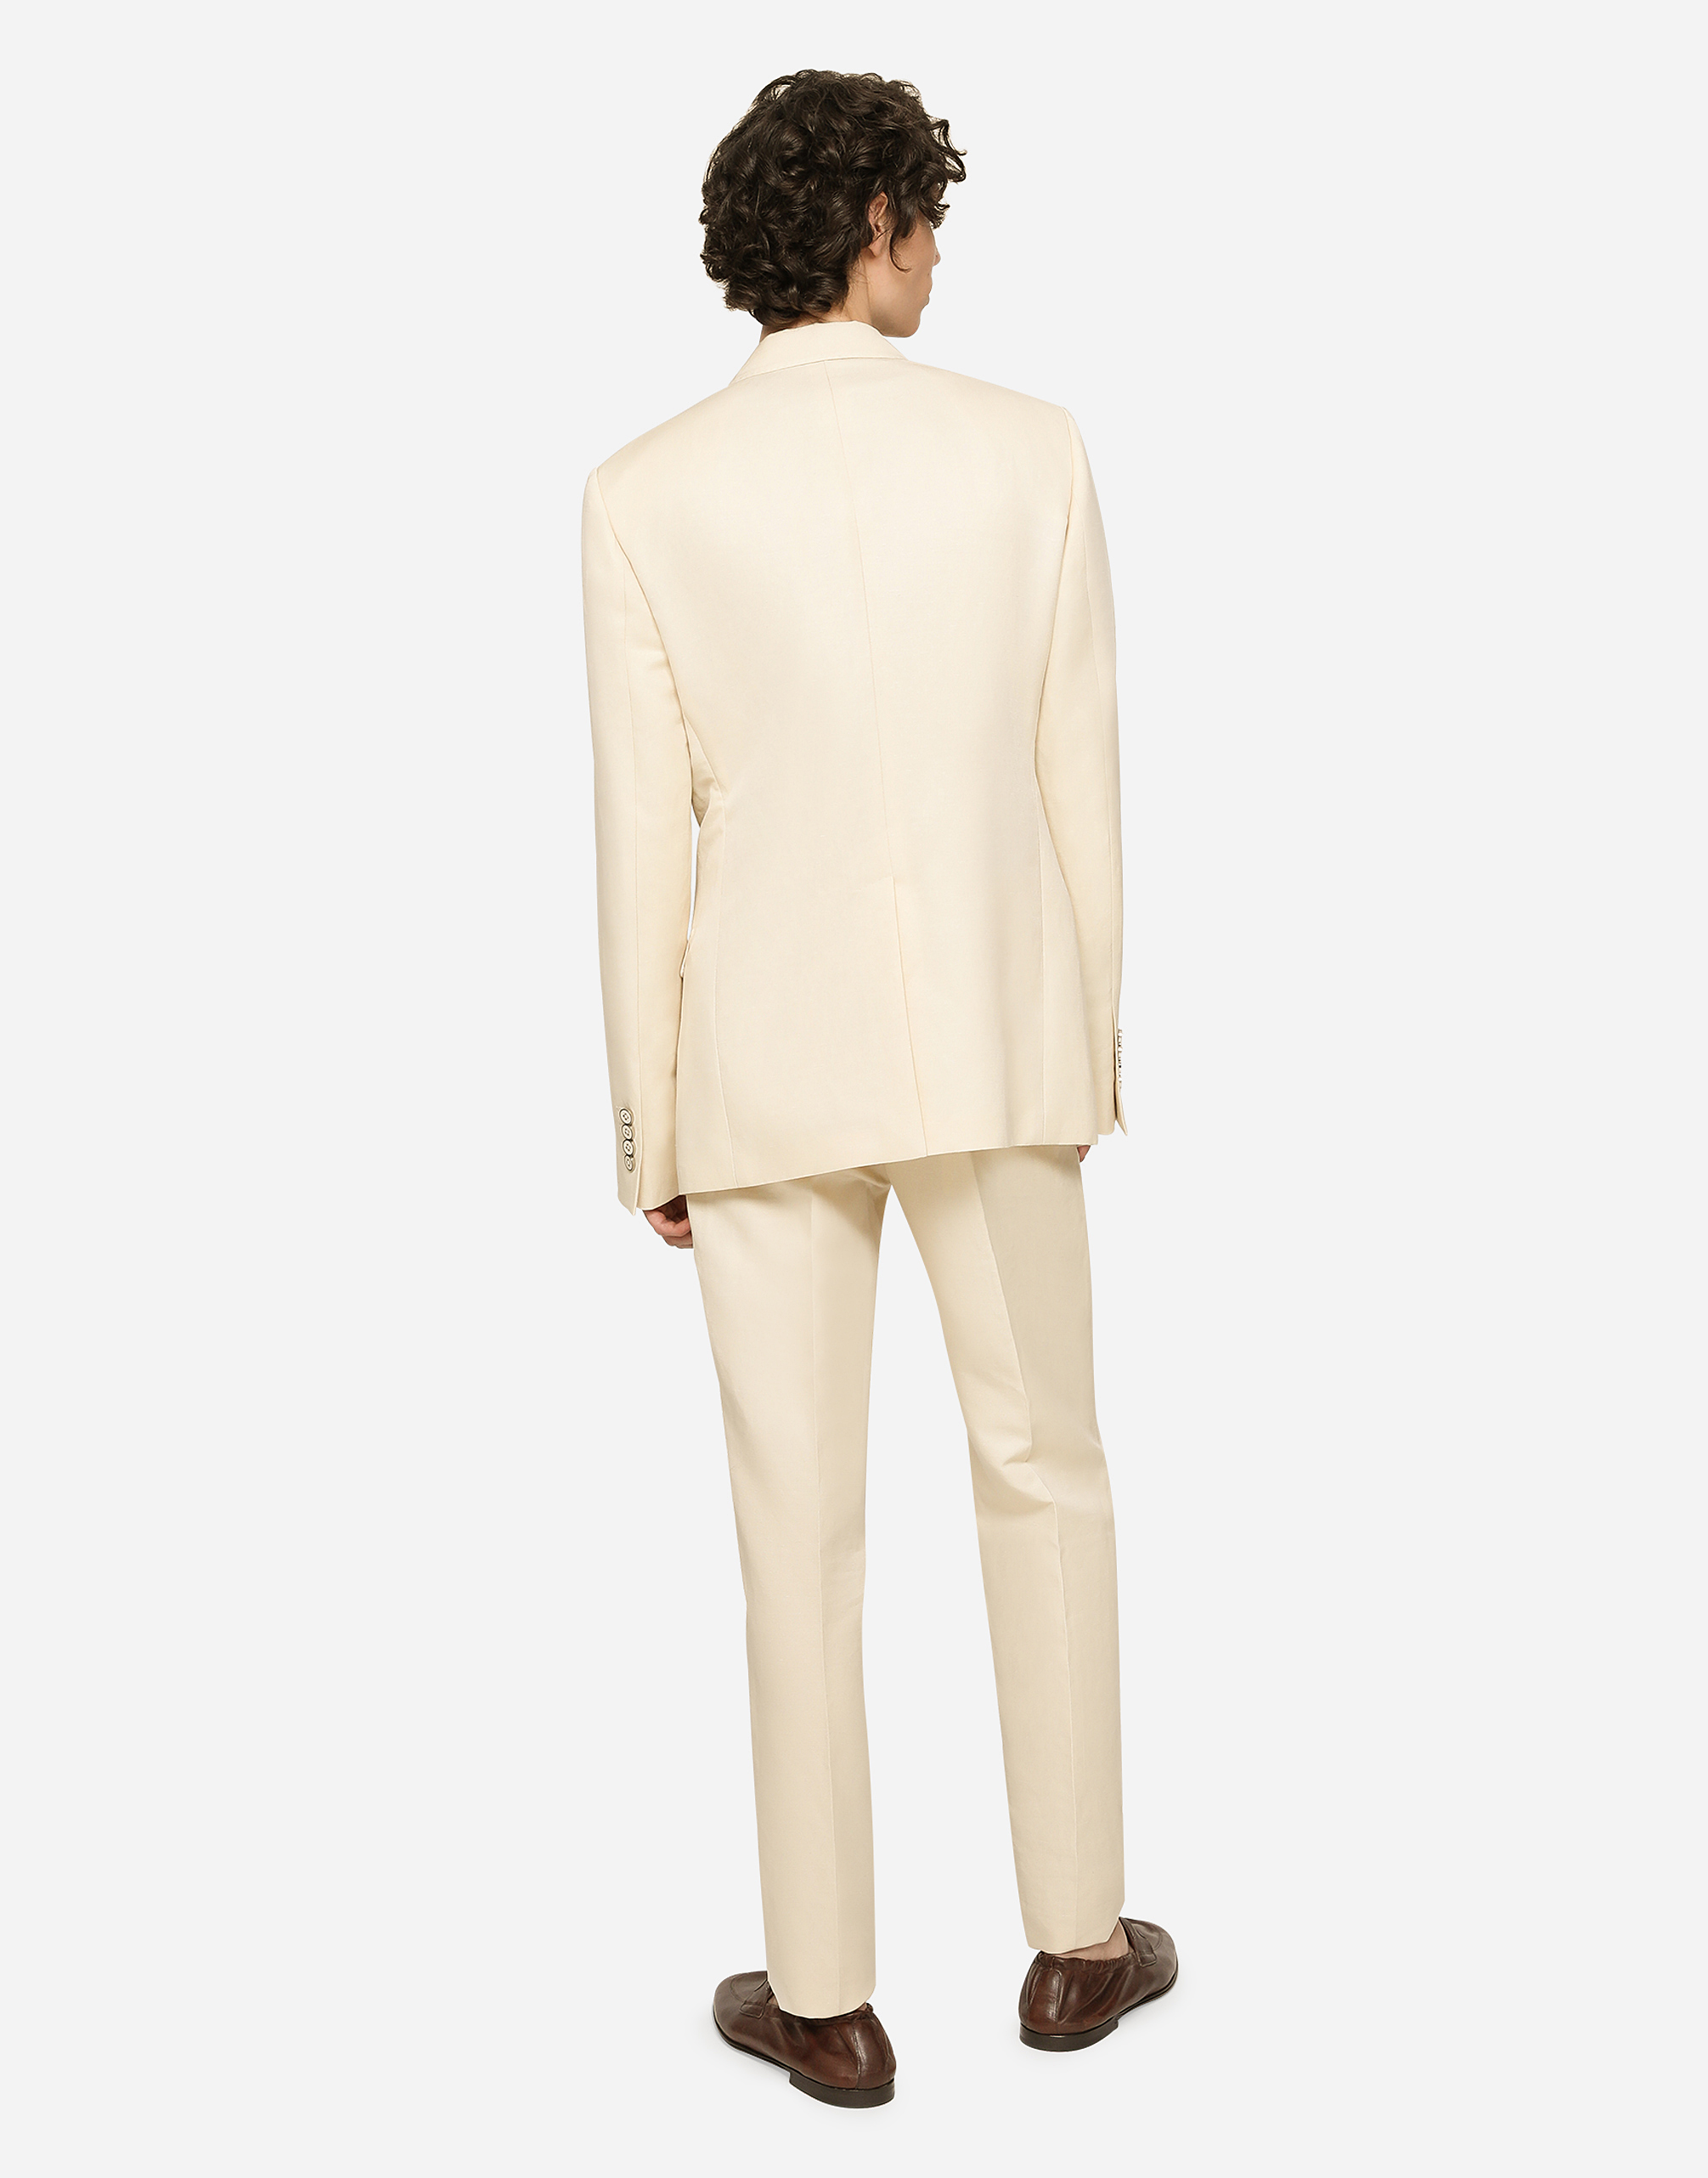 Single-breasted Taormina jacket in linen, cotton and silk